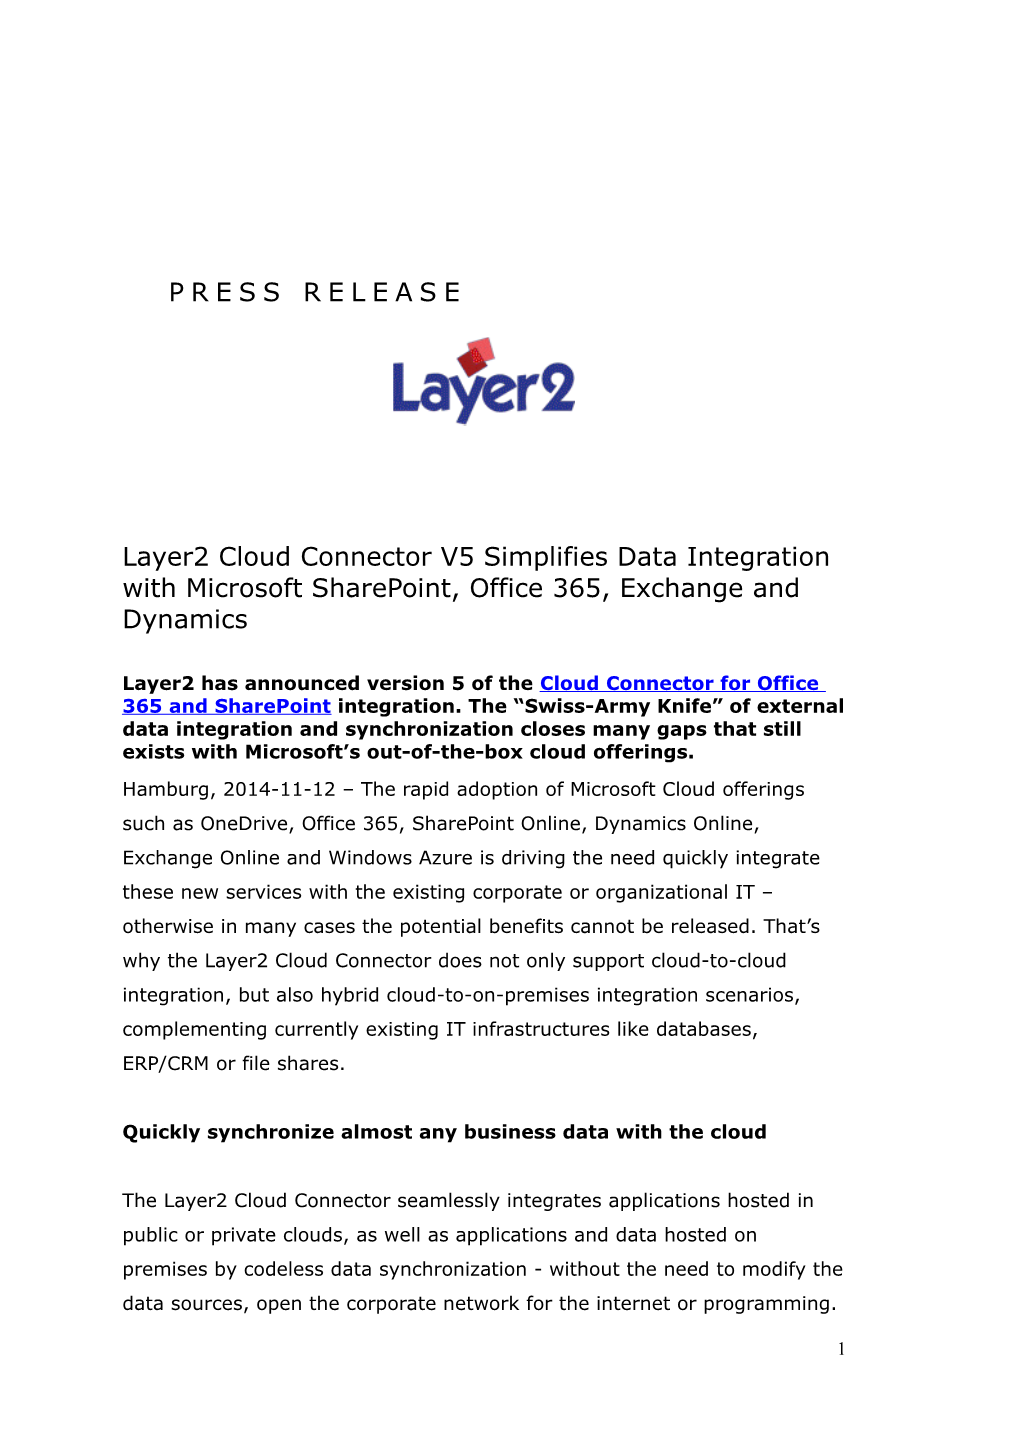 2014-11-12: Layer2 Cloud Connector V5 Simplifies Data Integration with Microsoft Sharepoint